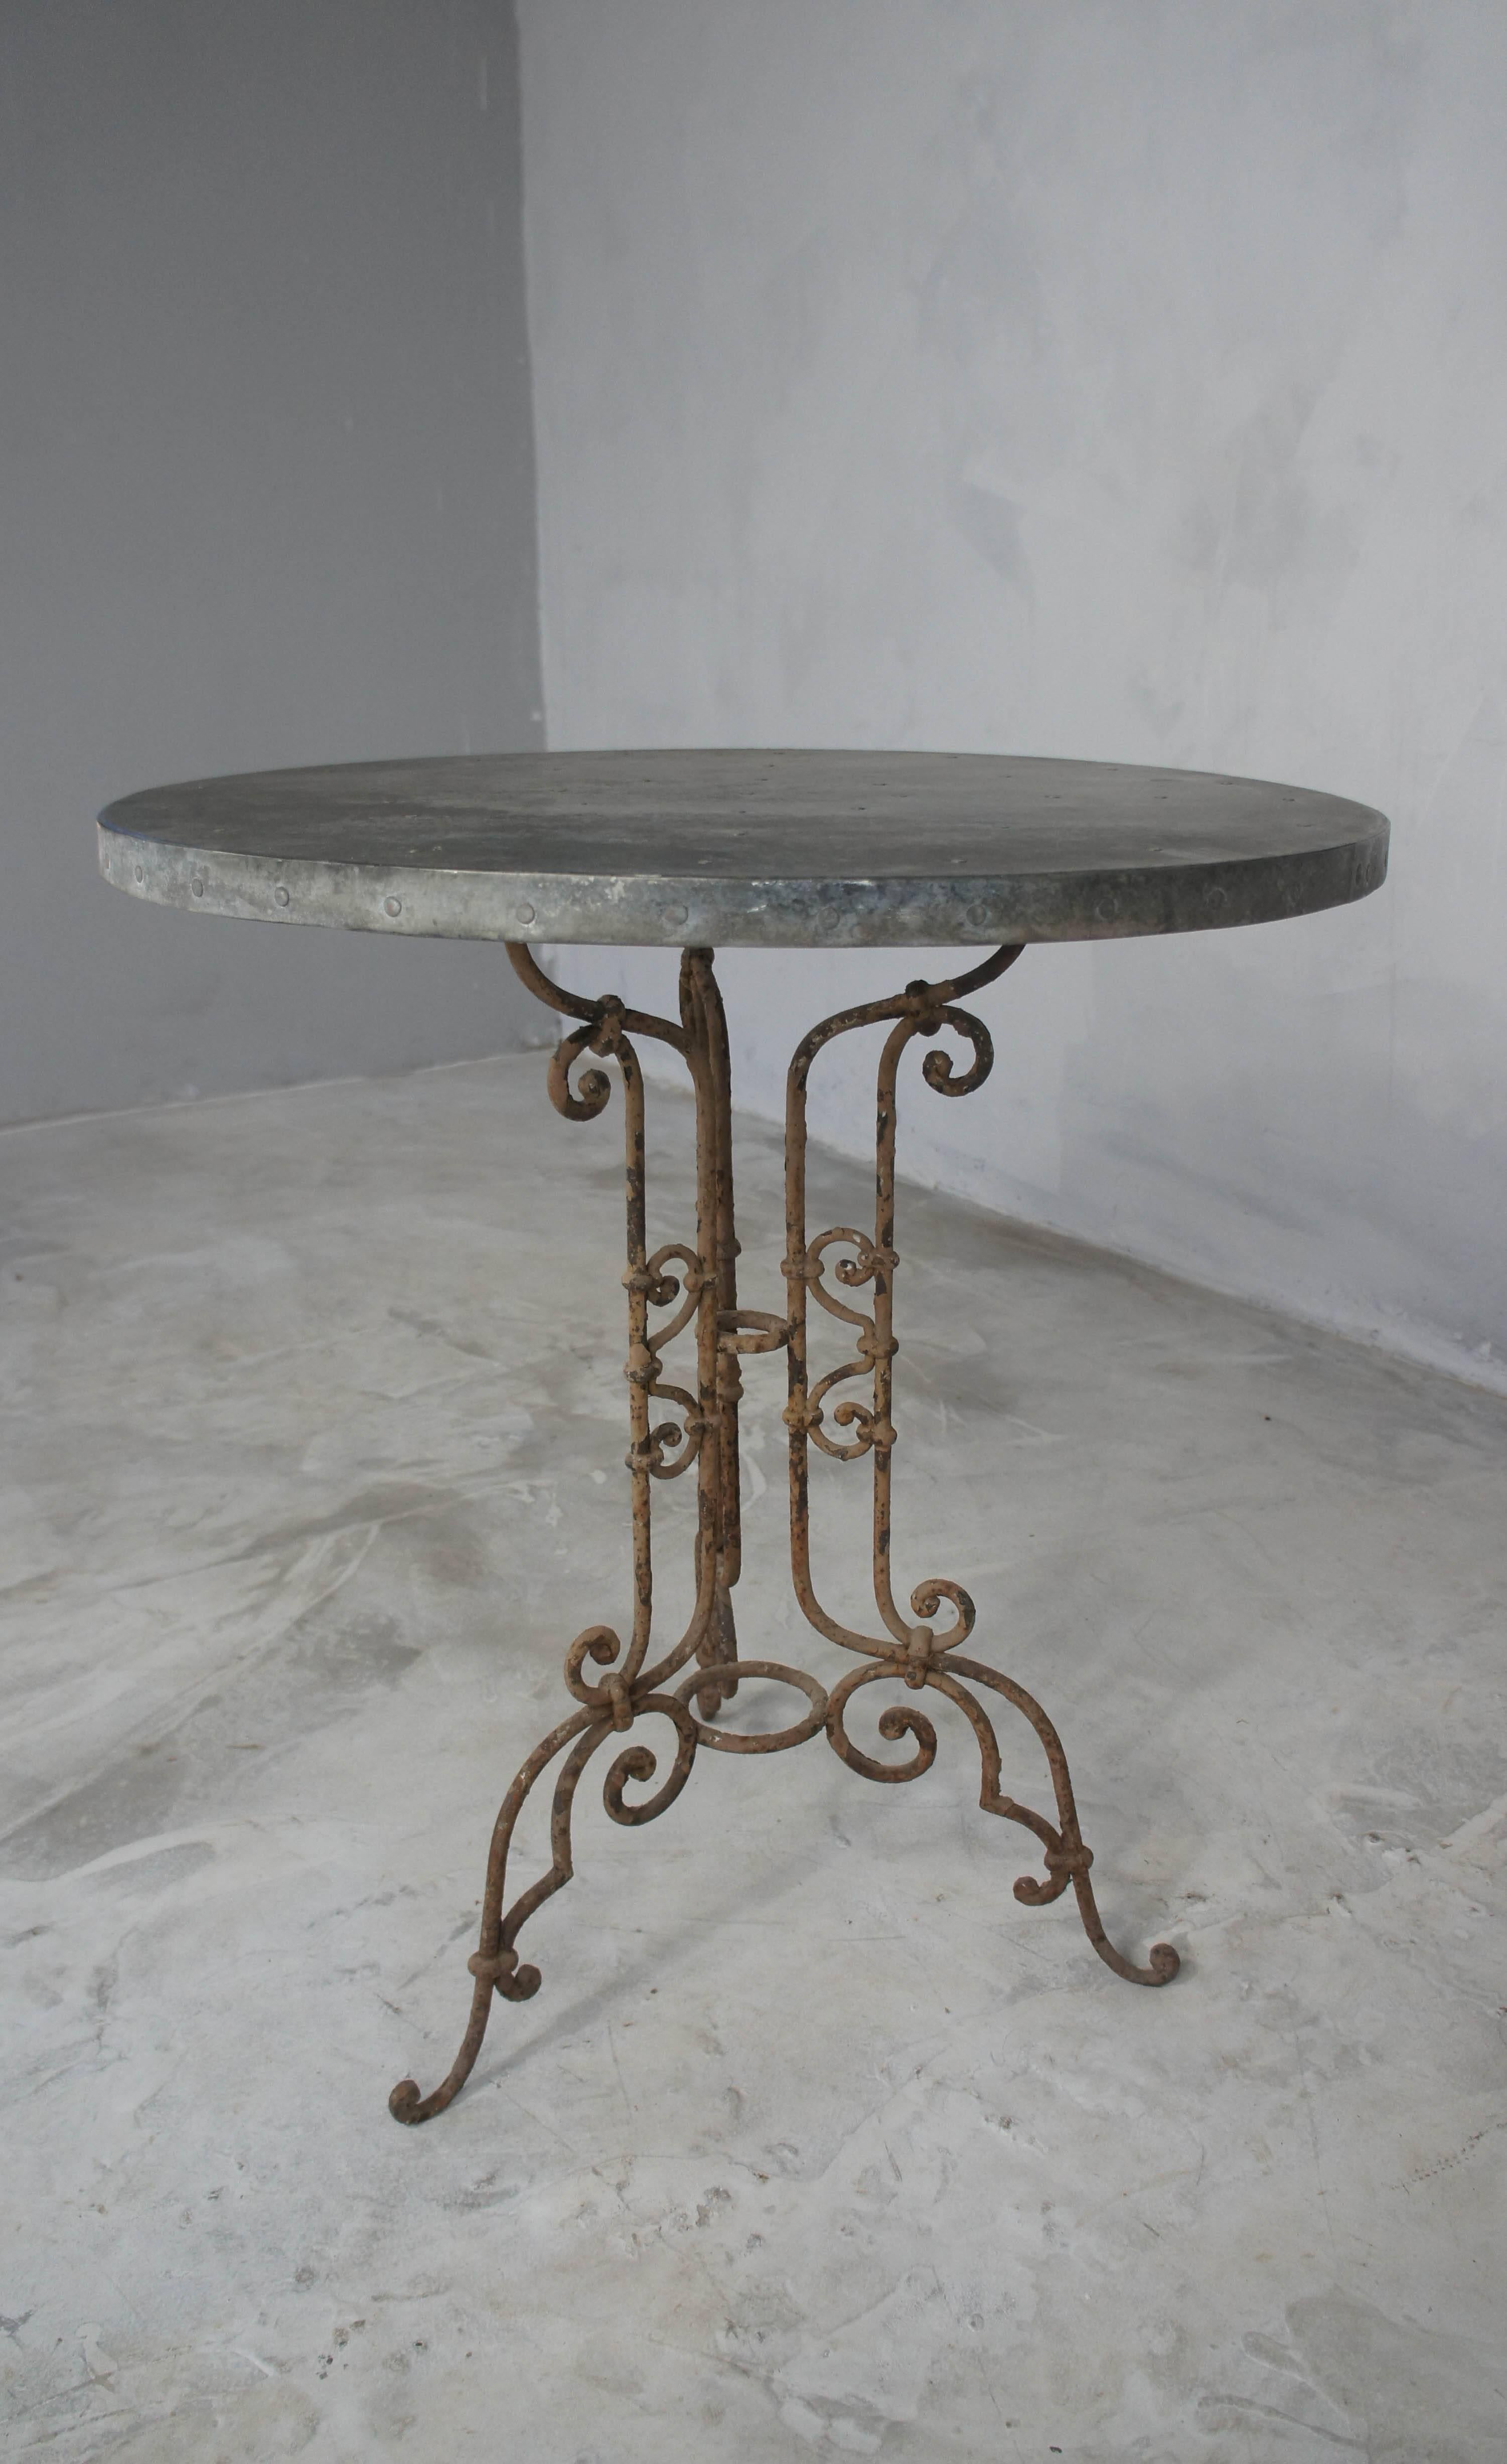 Very pretty wrought iron garden table with aged zinc top. Base has flaky brown paint and very decorative ironwork.
Perfect small table for the garden or patio.